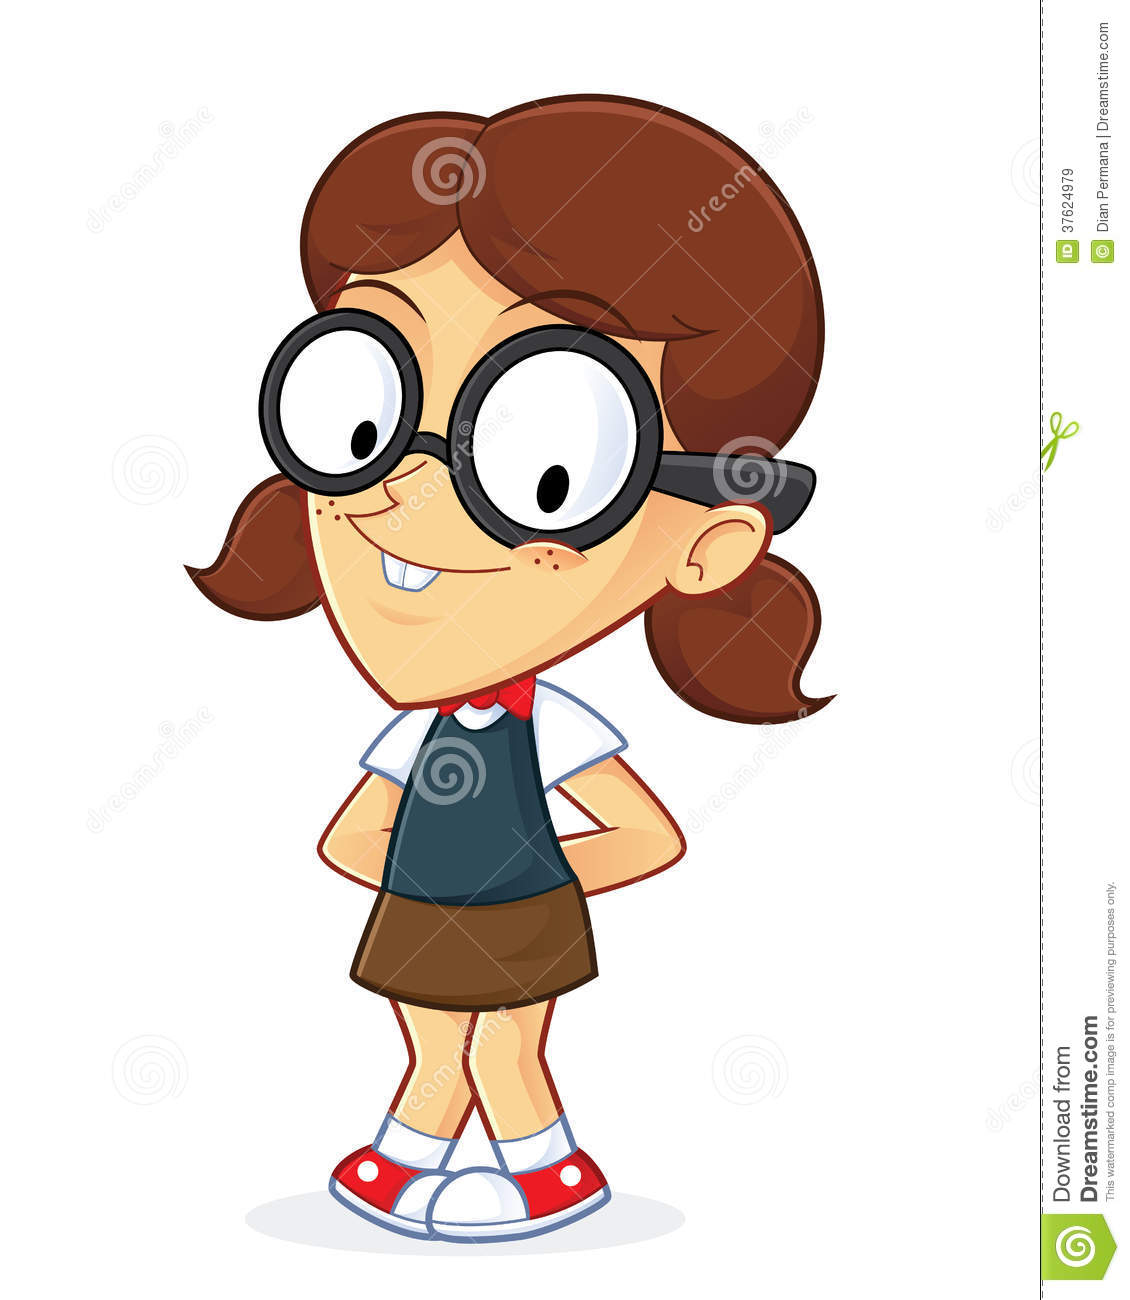 Girl Geek With Shy Expression Royalty Free Stock Images   Image